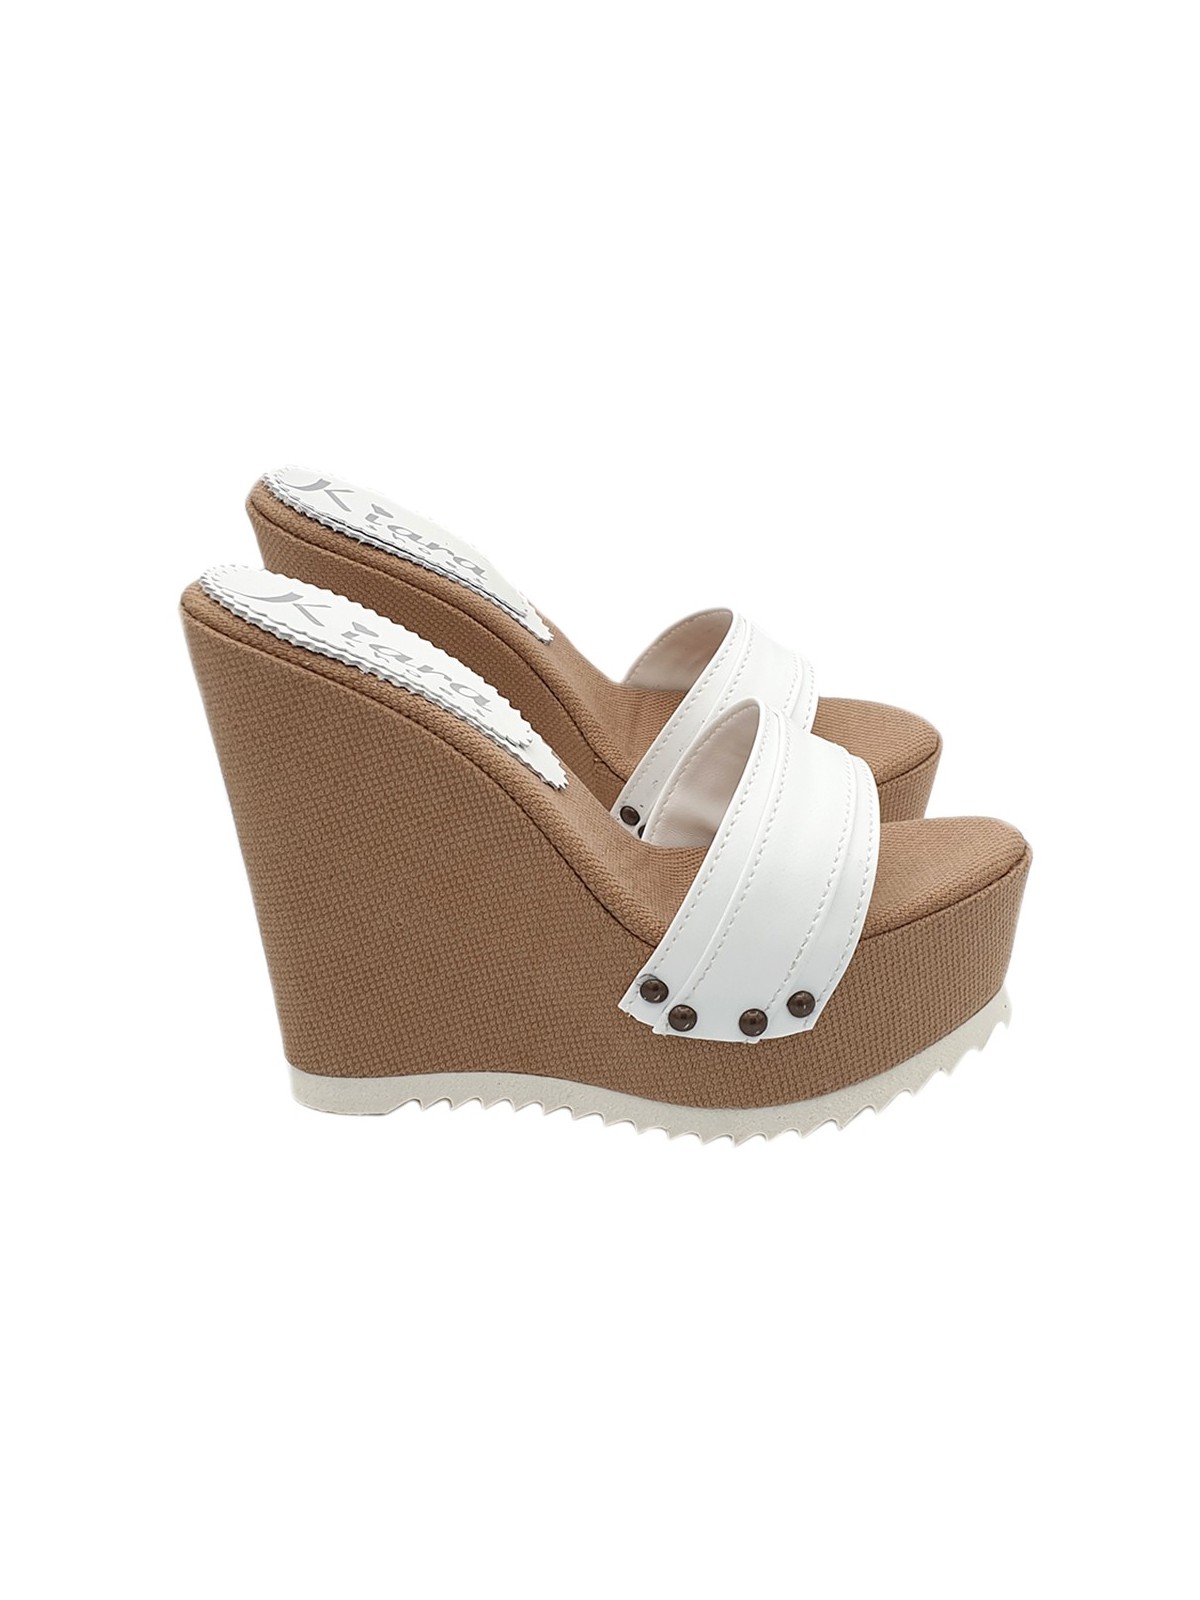 WHITE WOMEN'S WEDGES IN ROPE